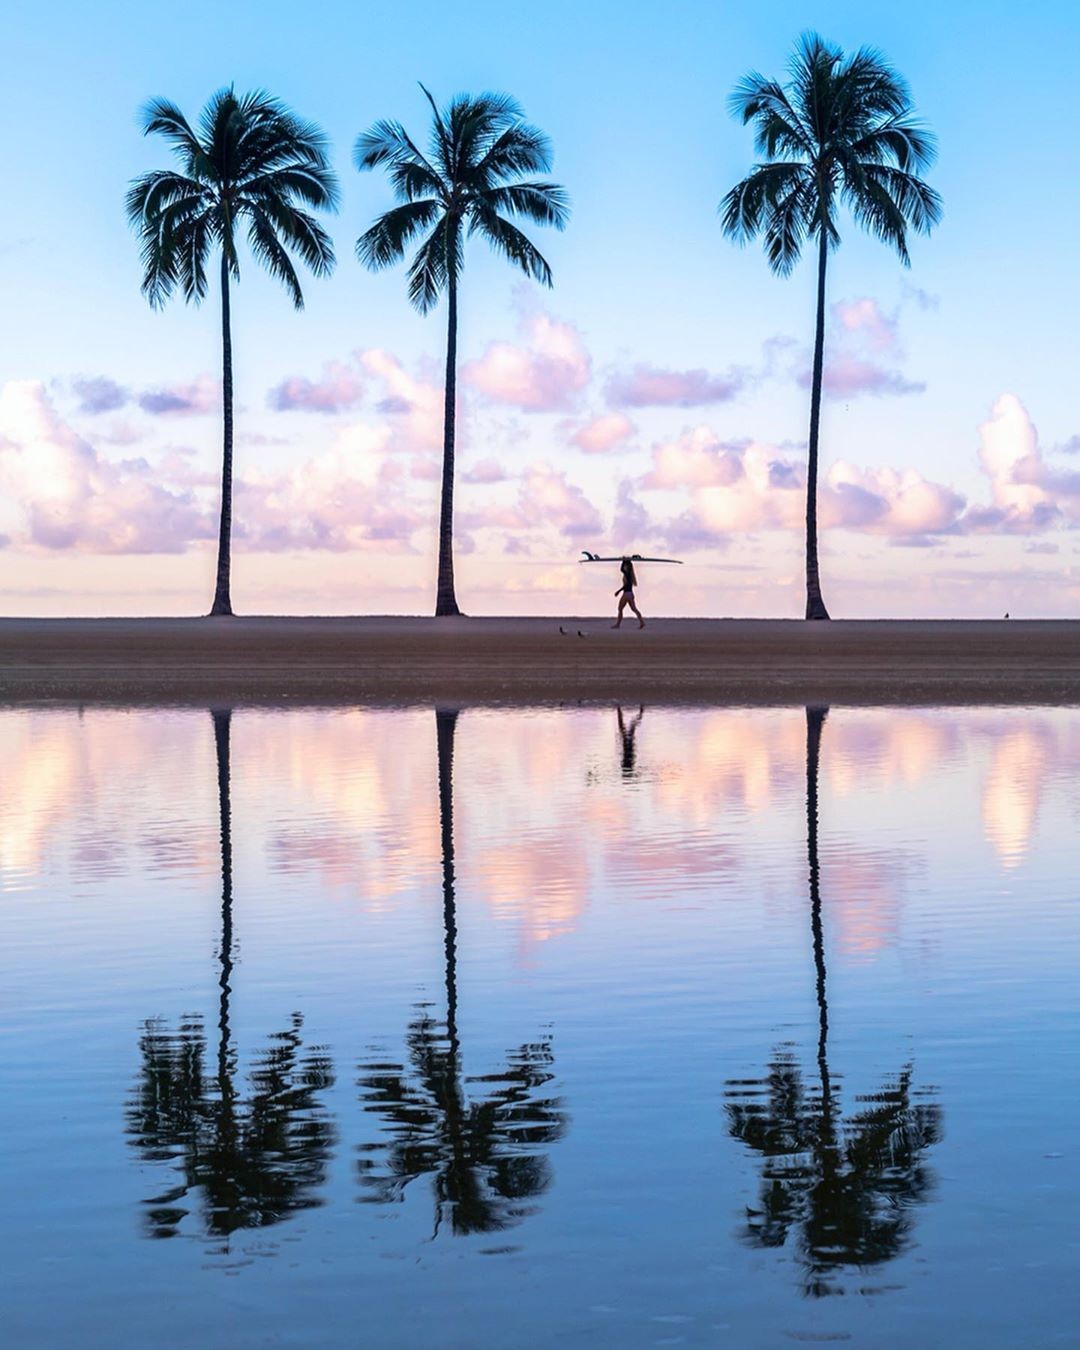 Sometimes the best Aloha Fridays are the ones where we pause and reflect.  #WeAreWard #repost @outofthewoods